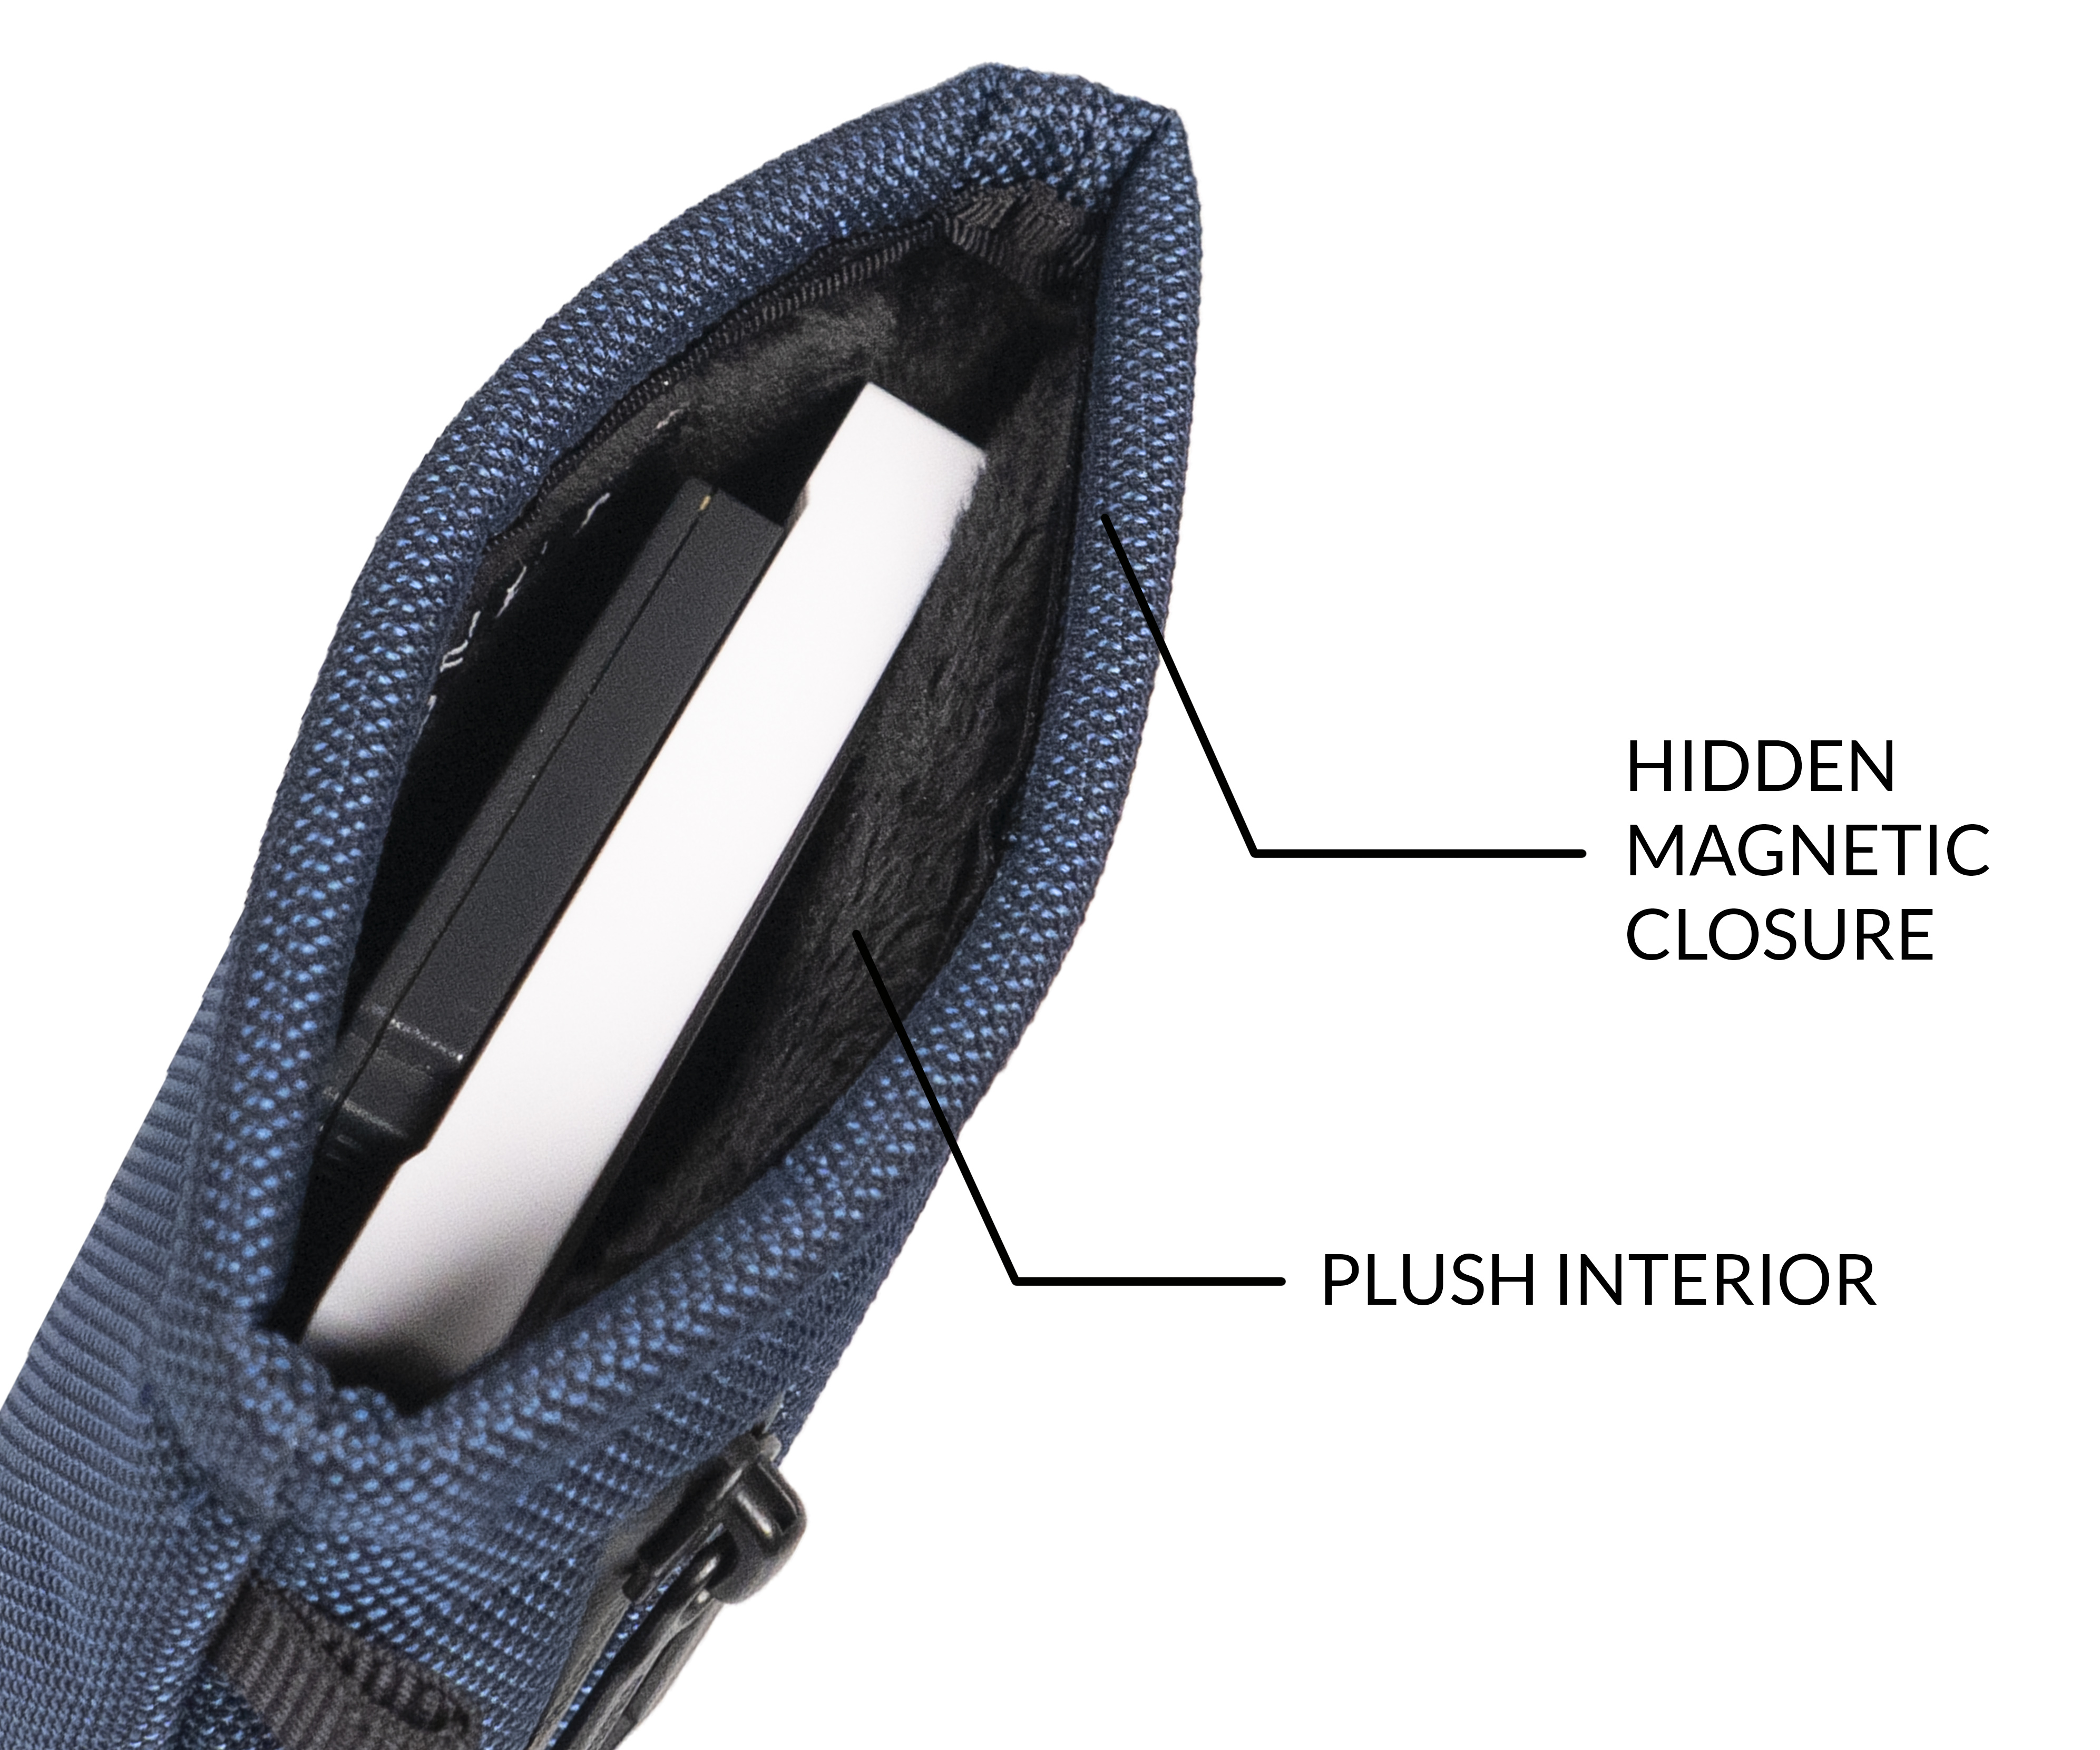 Analogue Pocket Pouch interior